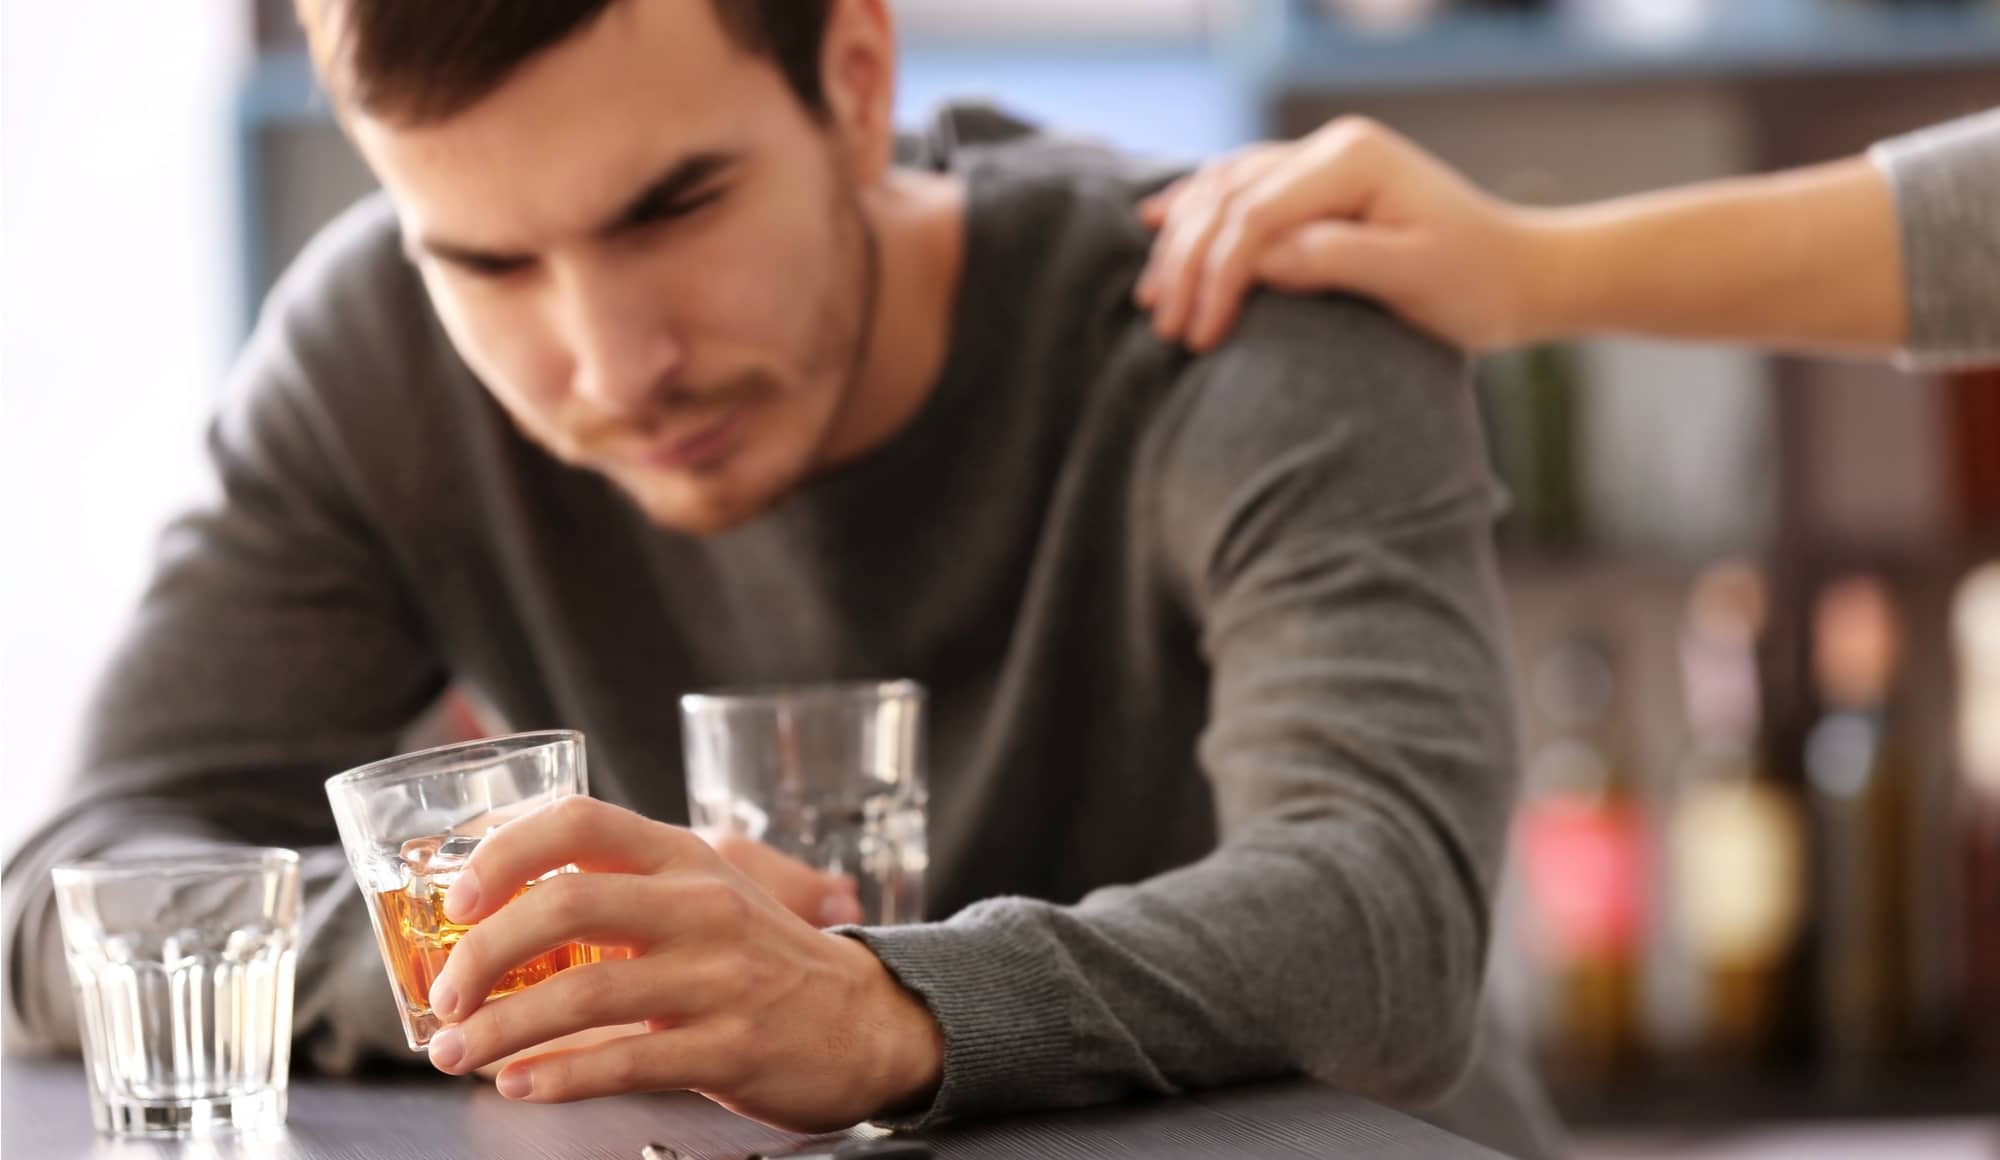 How to Tell Your Family You Need Help with Alcohol Pathfinders - A man is struggling with alcohol abuse and is determining how to tell his family that he may need an alcohol rehab or other form of rehabilitation treatment to overcome his substance abuse issues with alcohol.